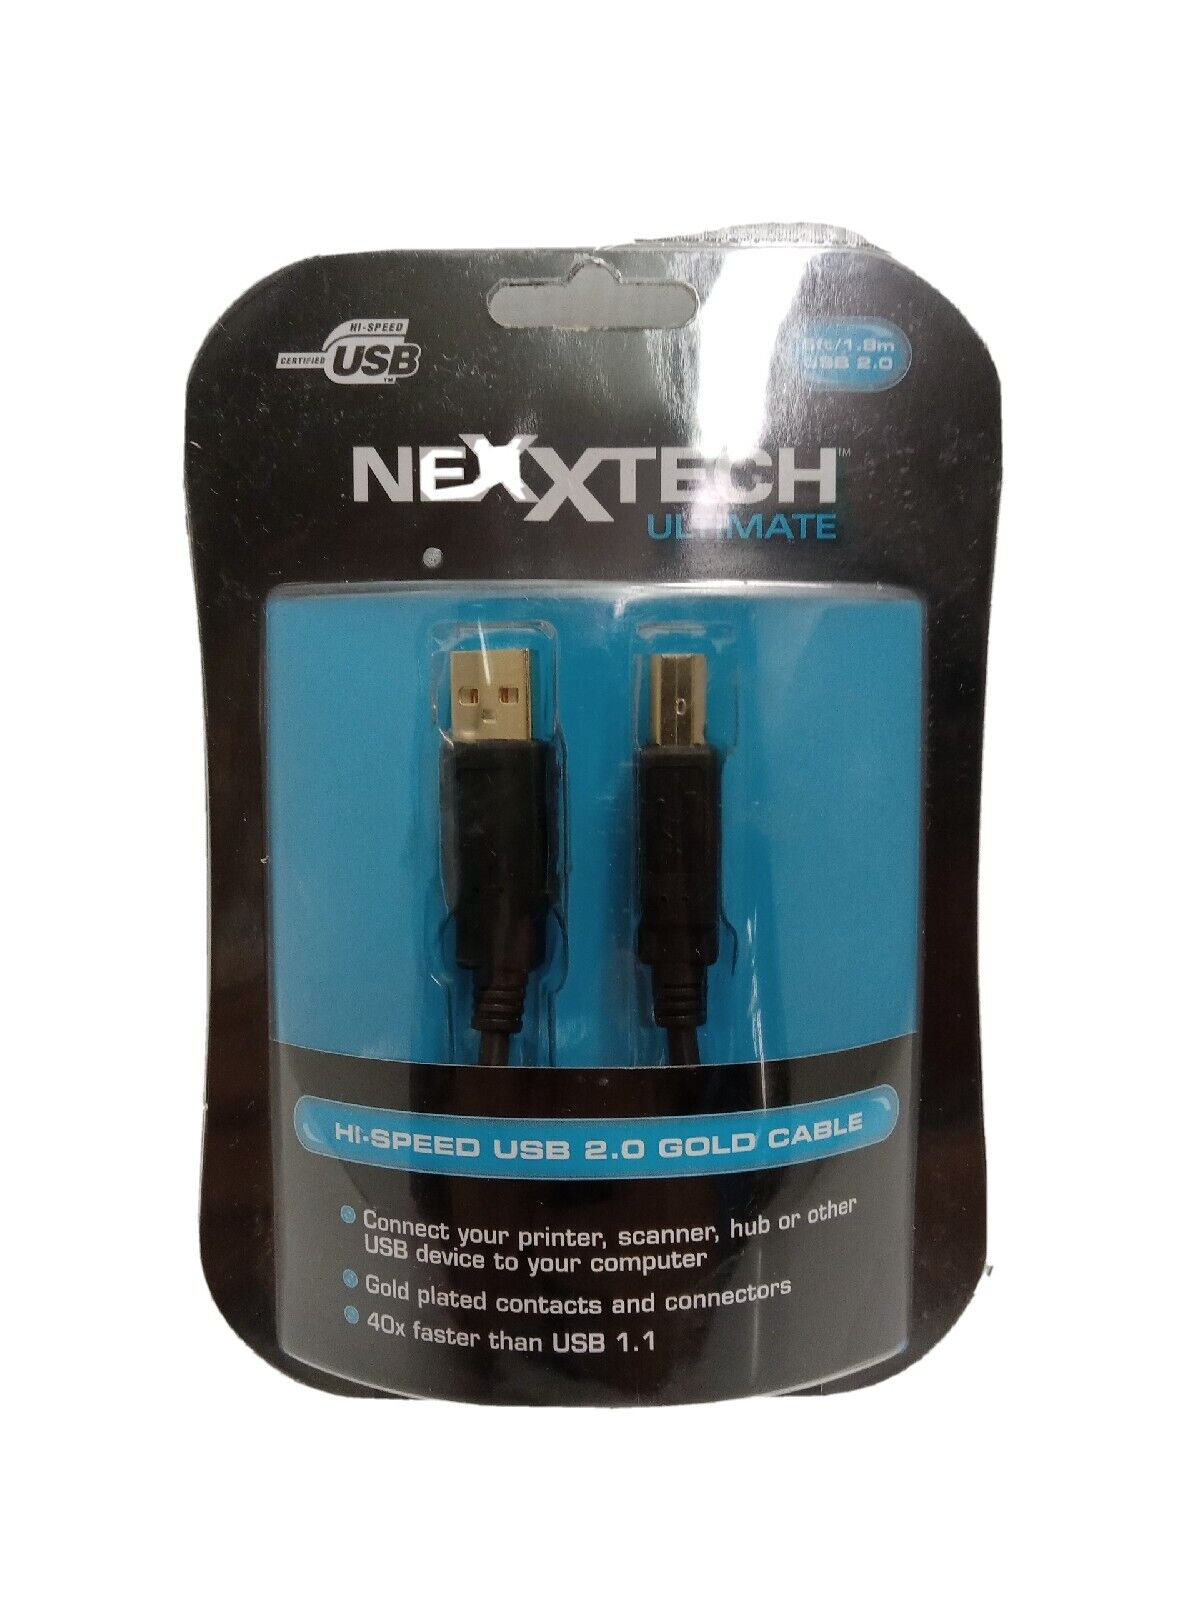 Nexxtech Ultimate 6 Ft / 1.8m Hi-Speed USB 2.0 Gold Cable